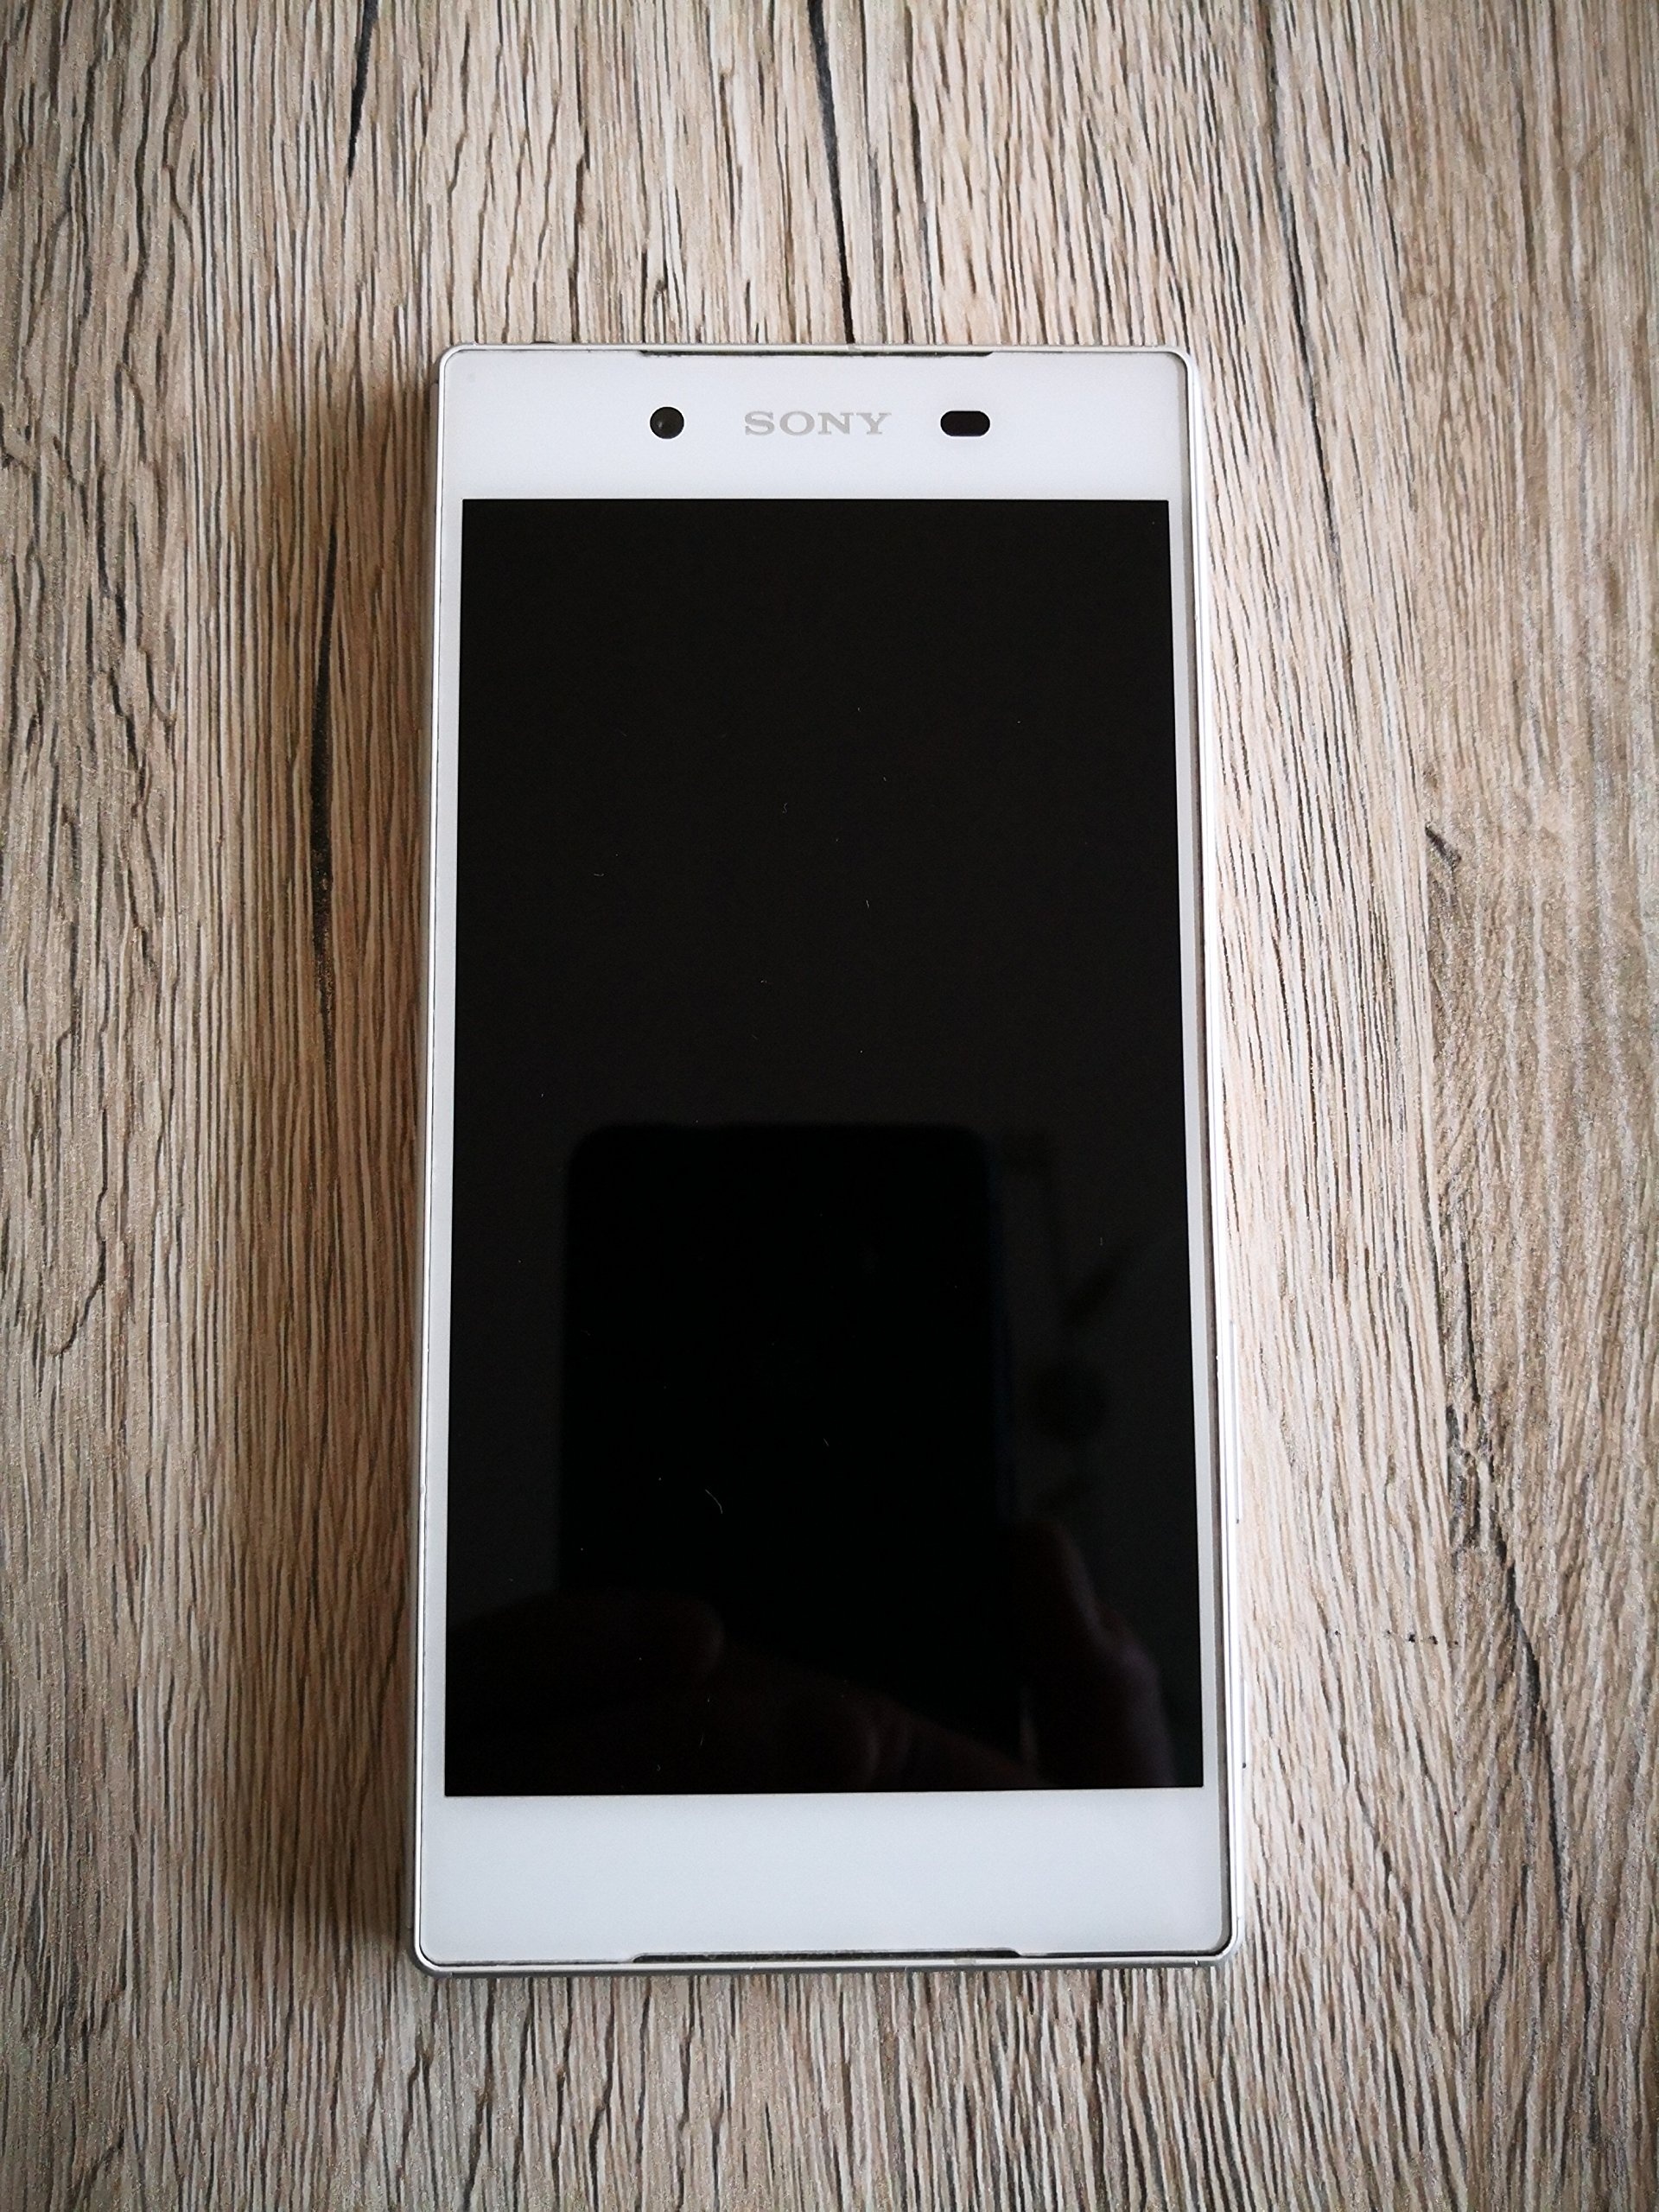 Sony Xperia Z5 Smartphone (5,2 Zoll (13,2 cm) Touch-Display, 32 GB interner Speicher, Android 6.0) silber